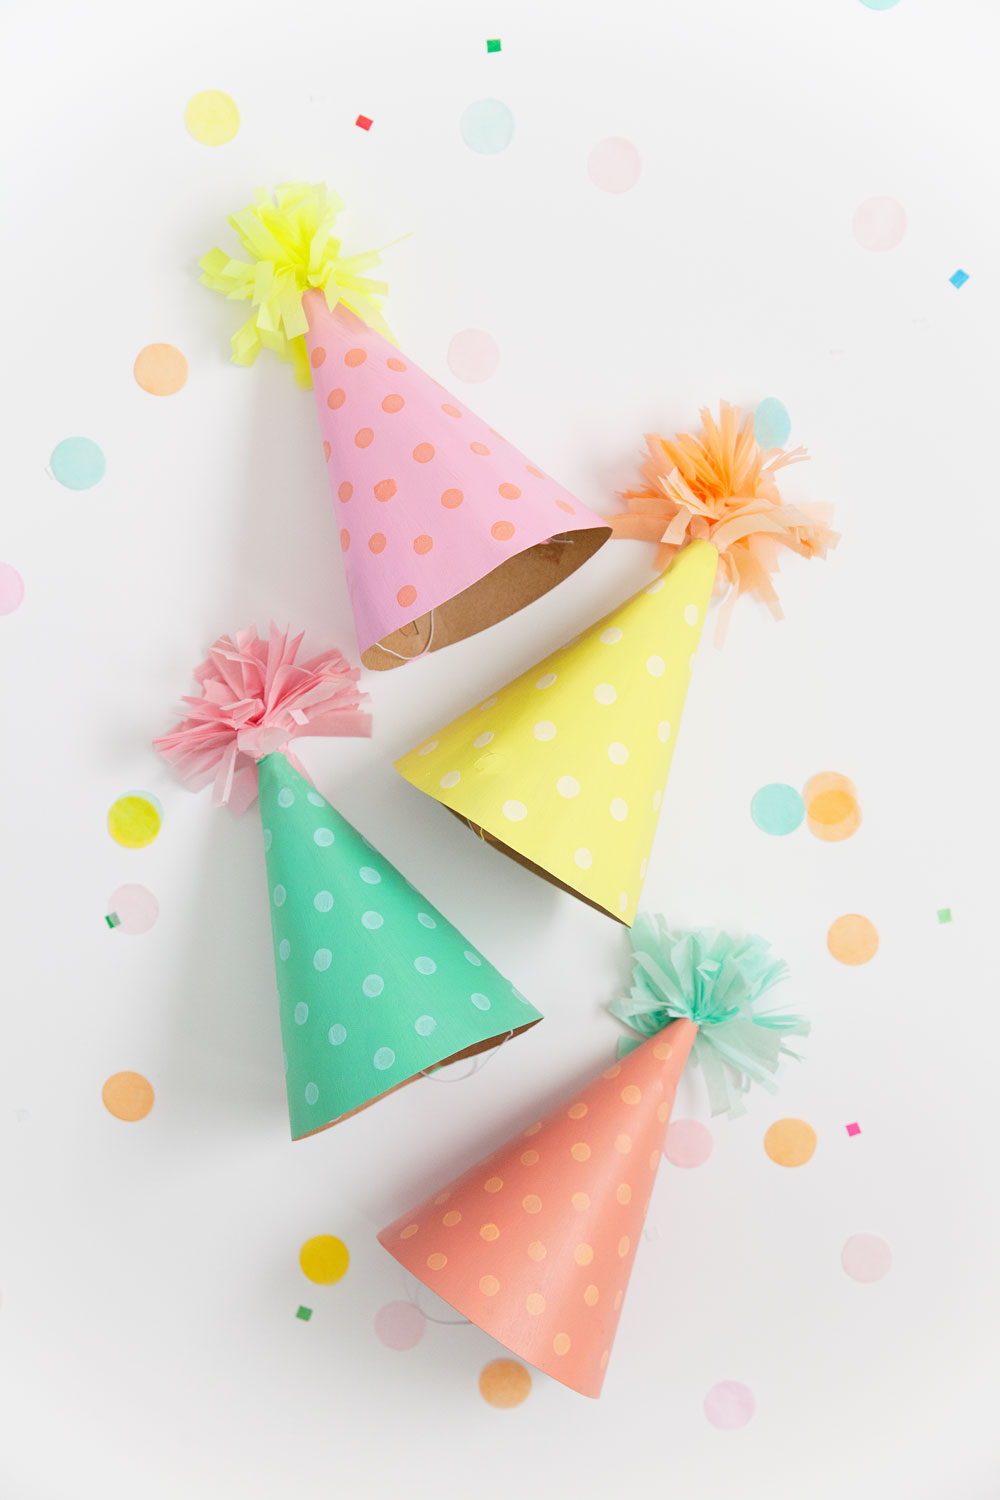 DIY party hats! Learn how to make these adorable pastel party hats which are sure to be a hit!